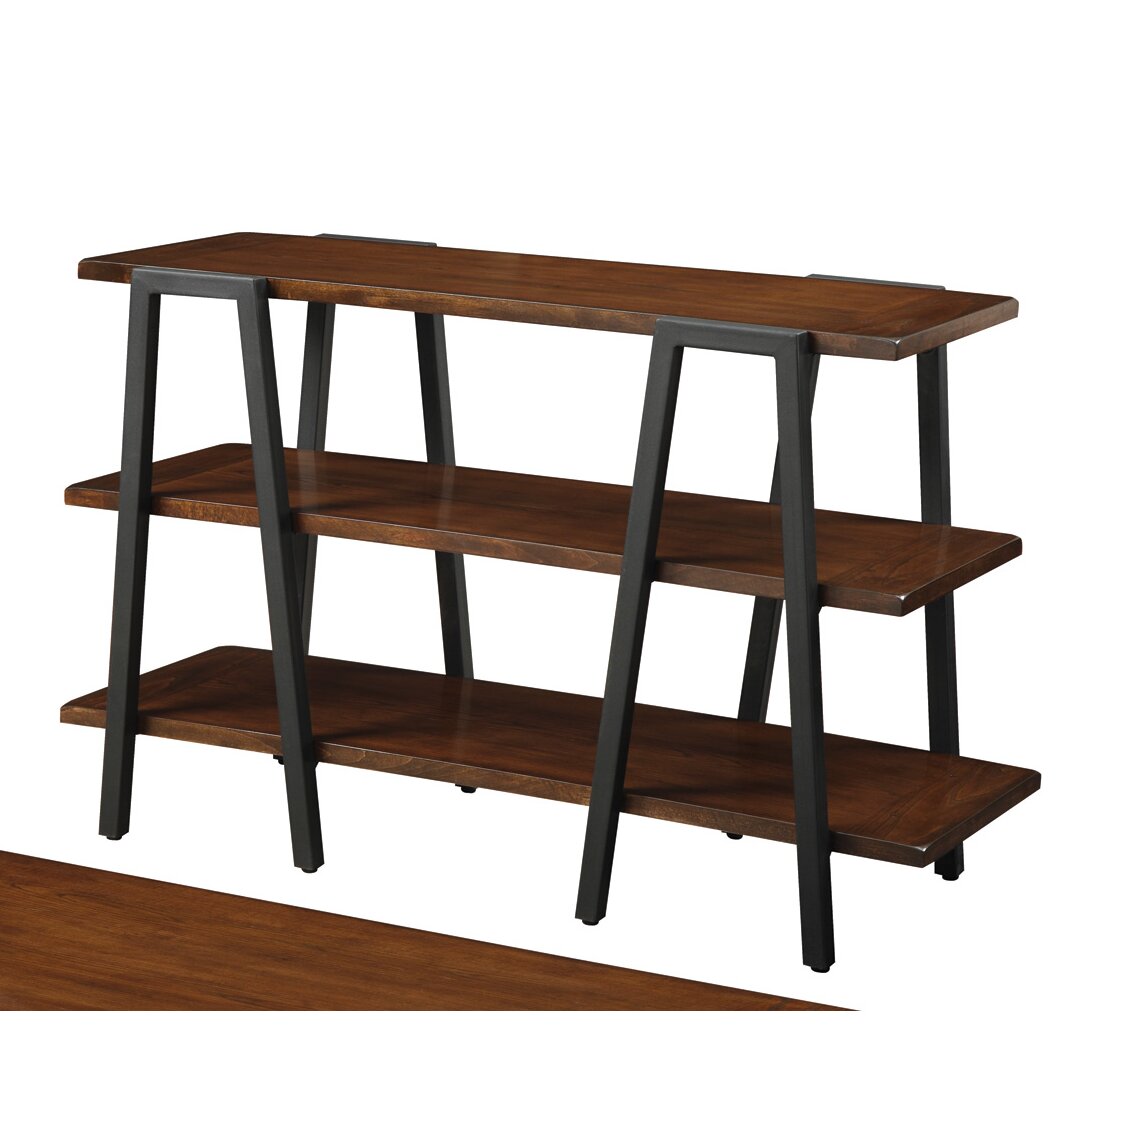 Wildon Home %2525C2%2525AE Console Table 814390 